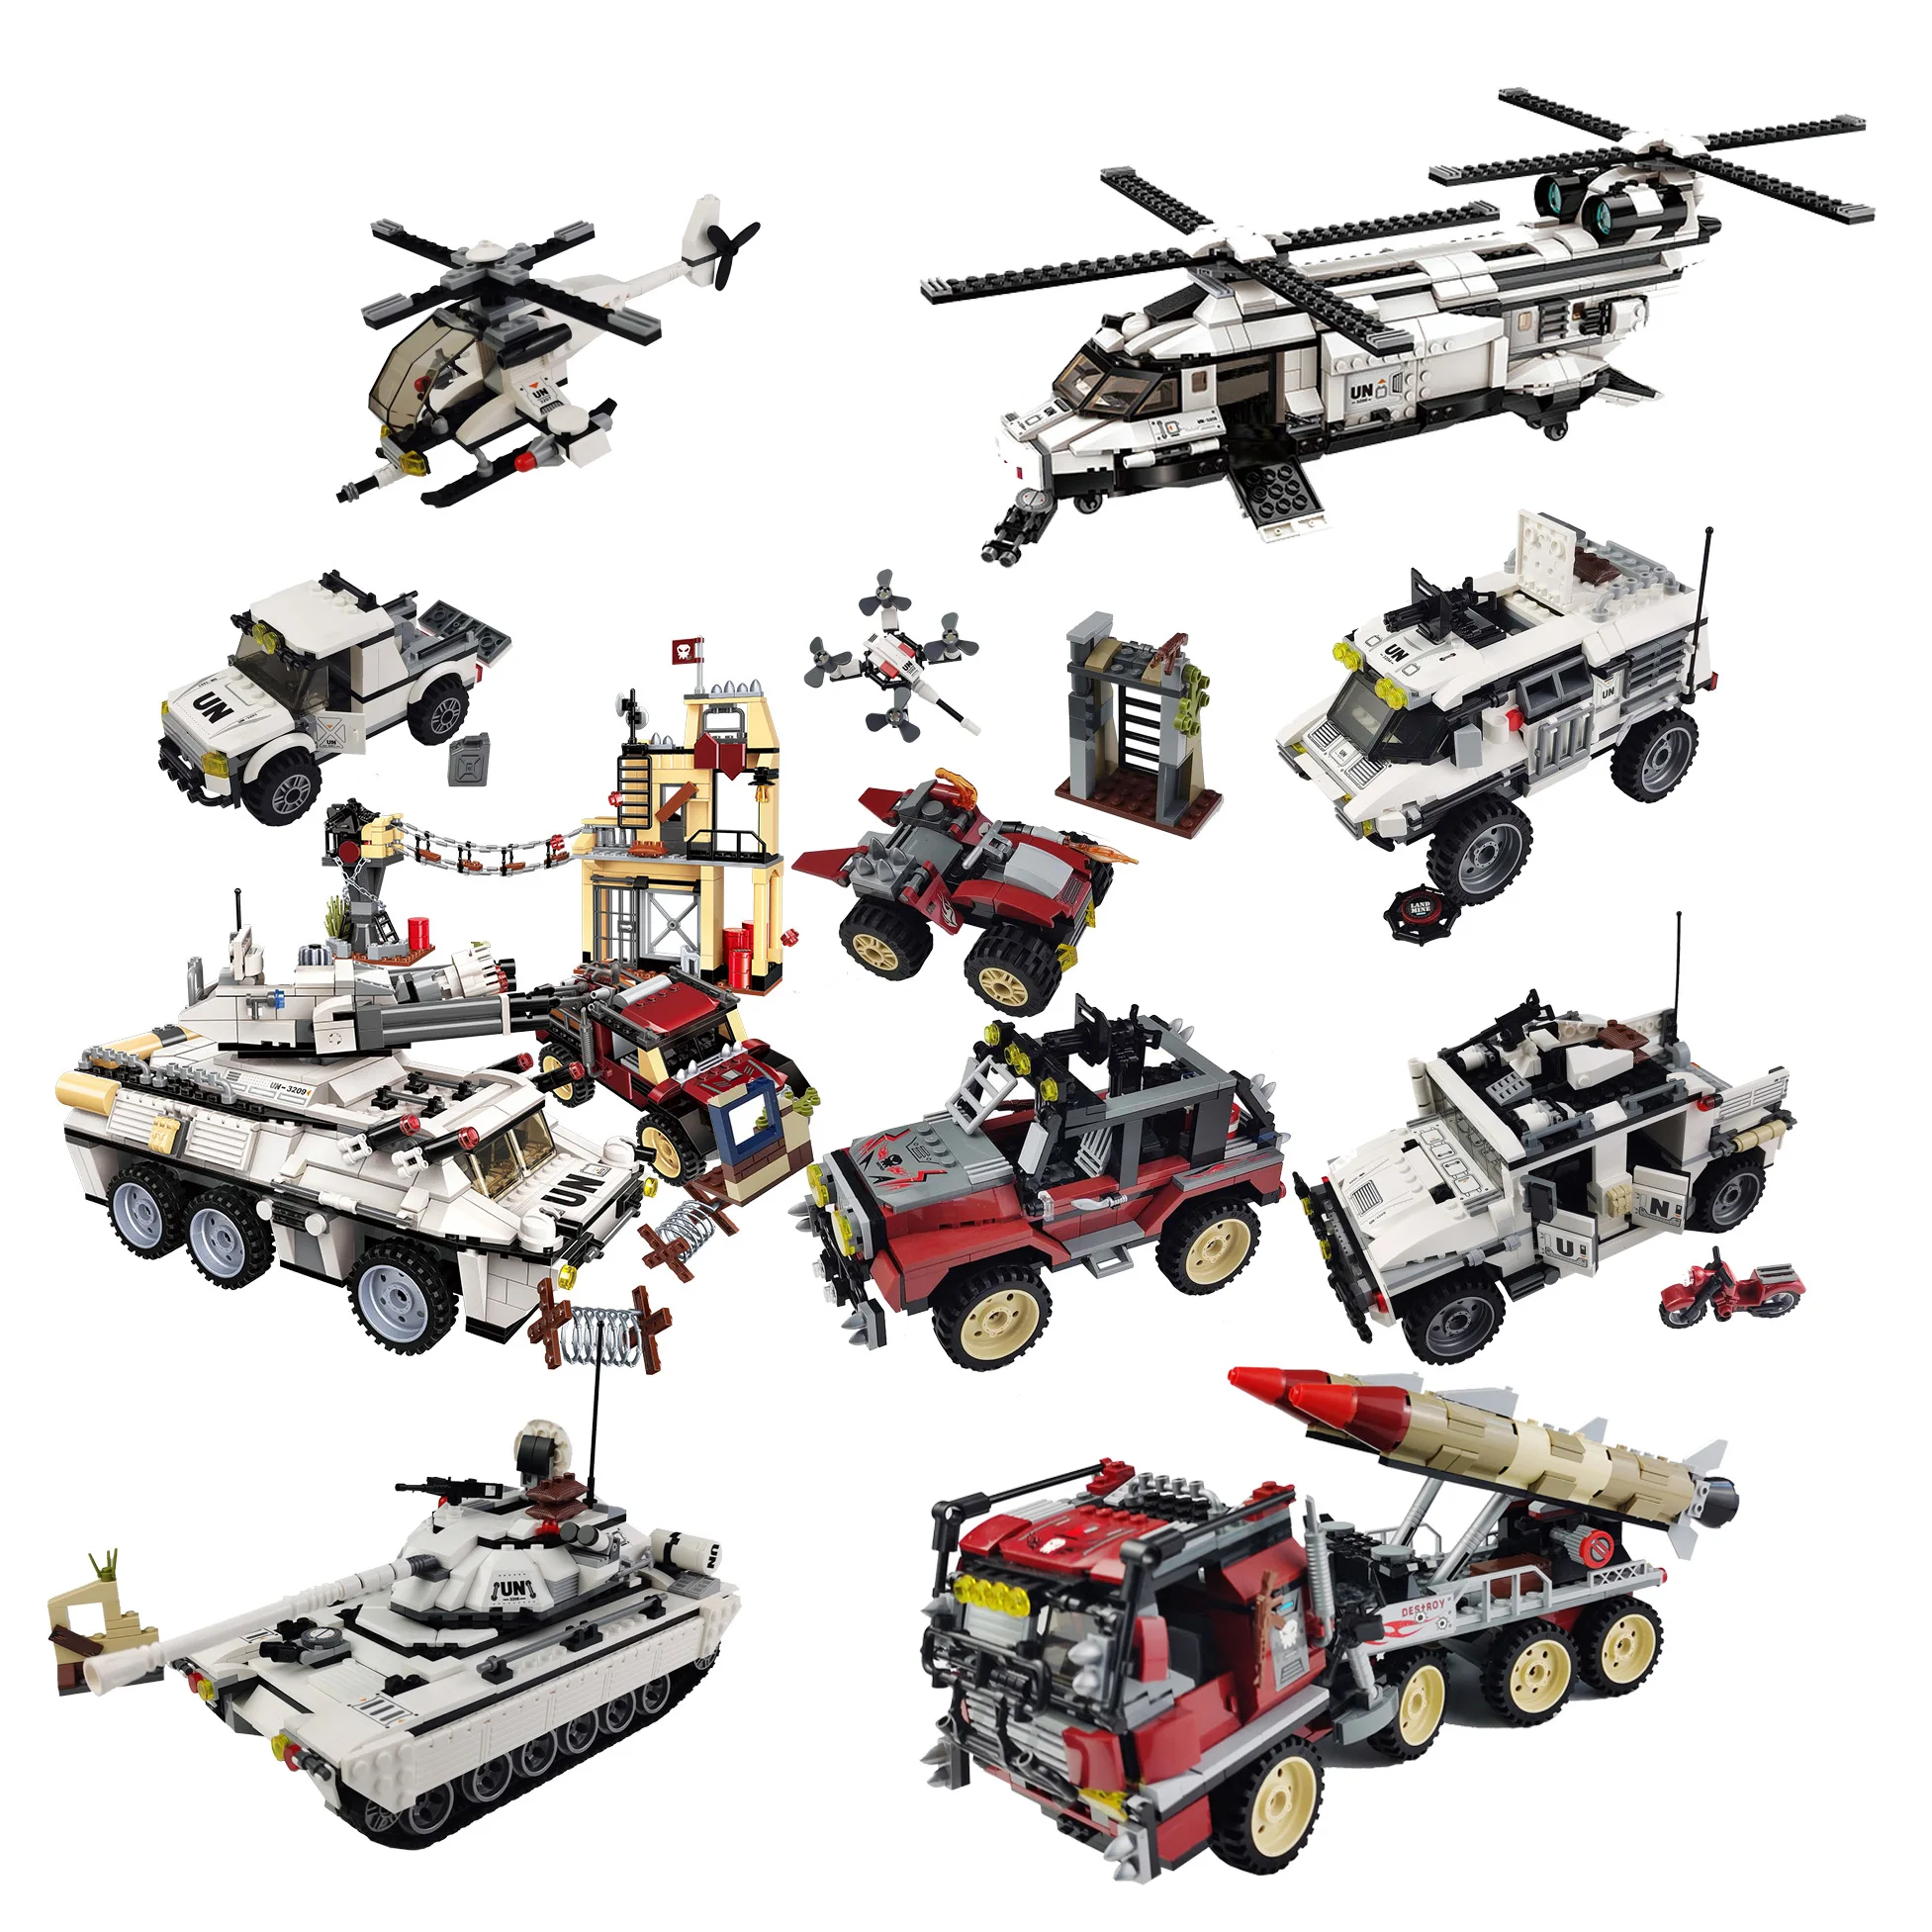 

Peacekeeping Force Building Block Thunder Mission Heavy Armed Vehicle Attack 935pcs Educational Bricks Toy For Boy Gif